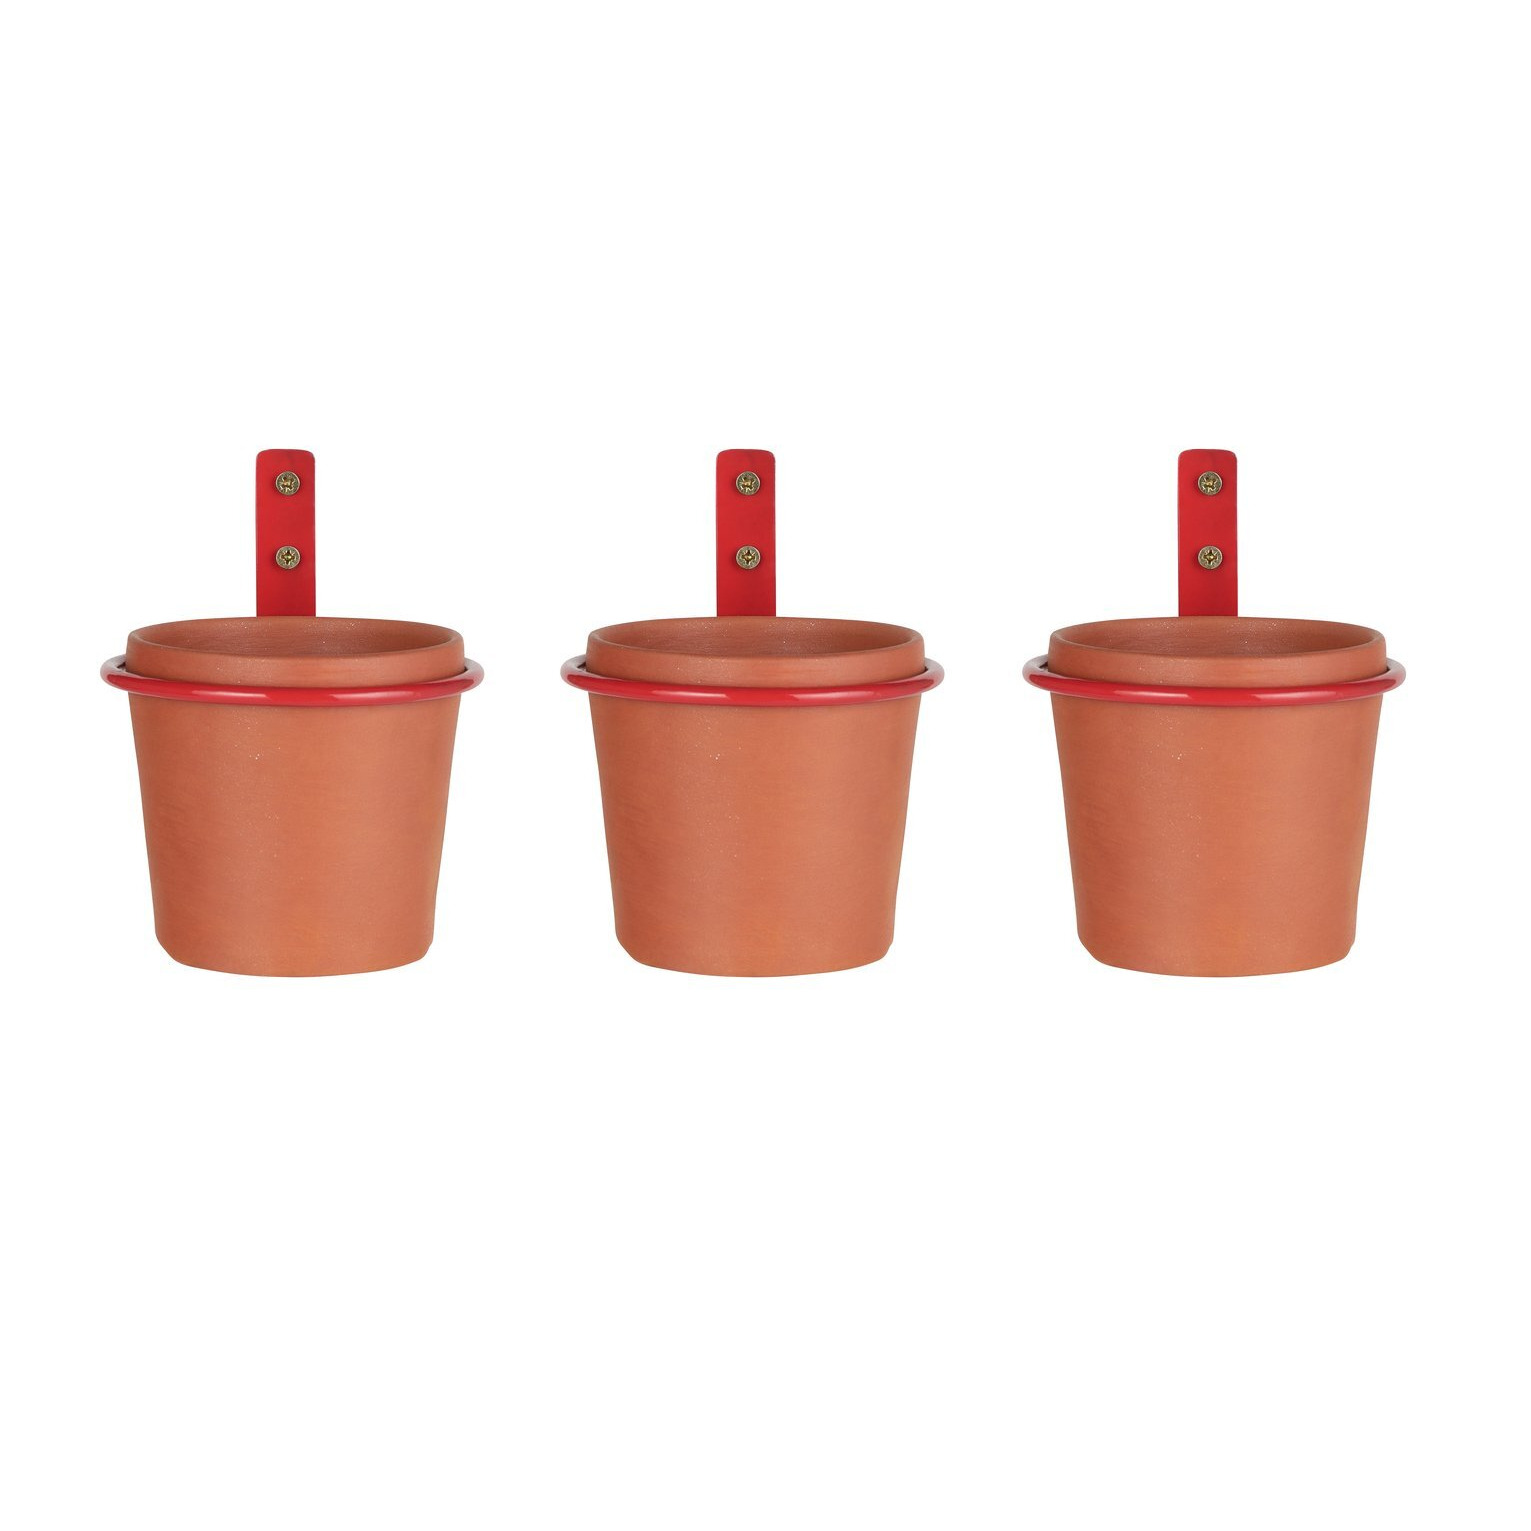 Garden by Sainsbury's Wall Pot Planter with Bracket-Set of 3 - image 1